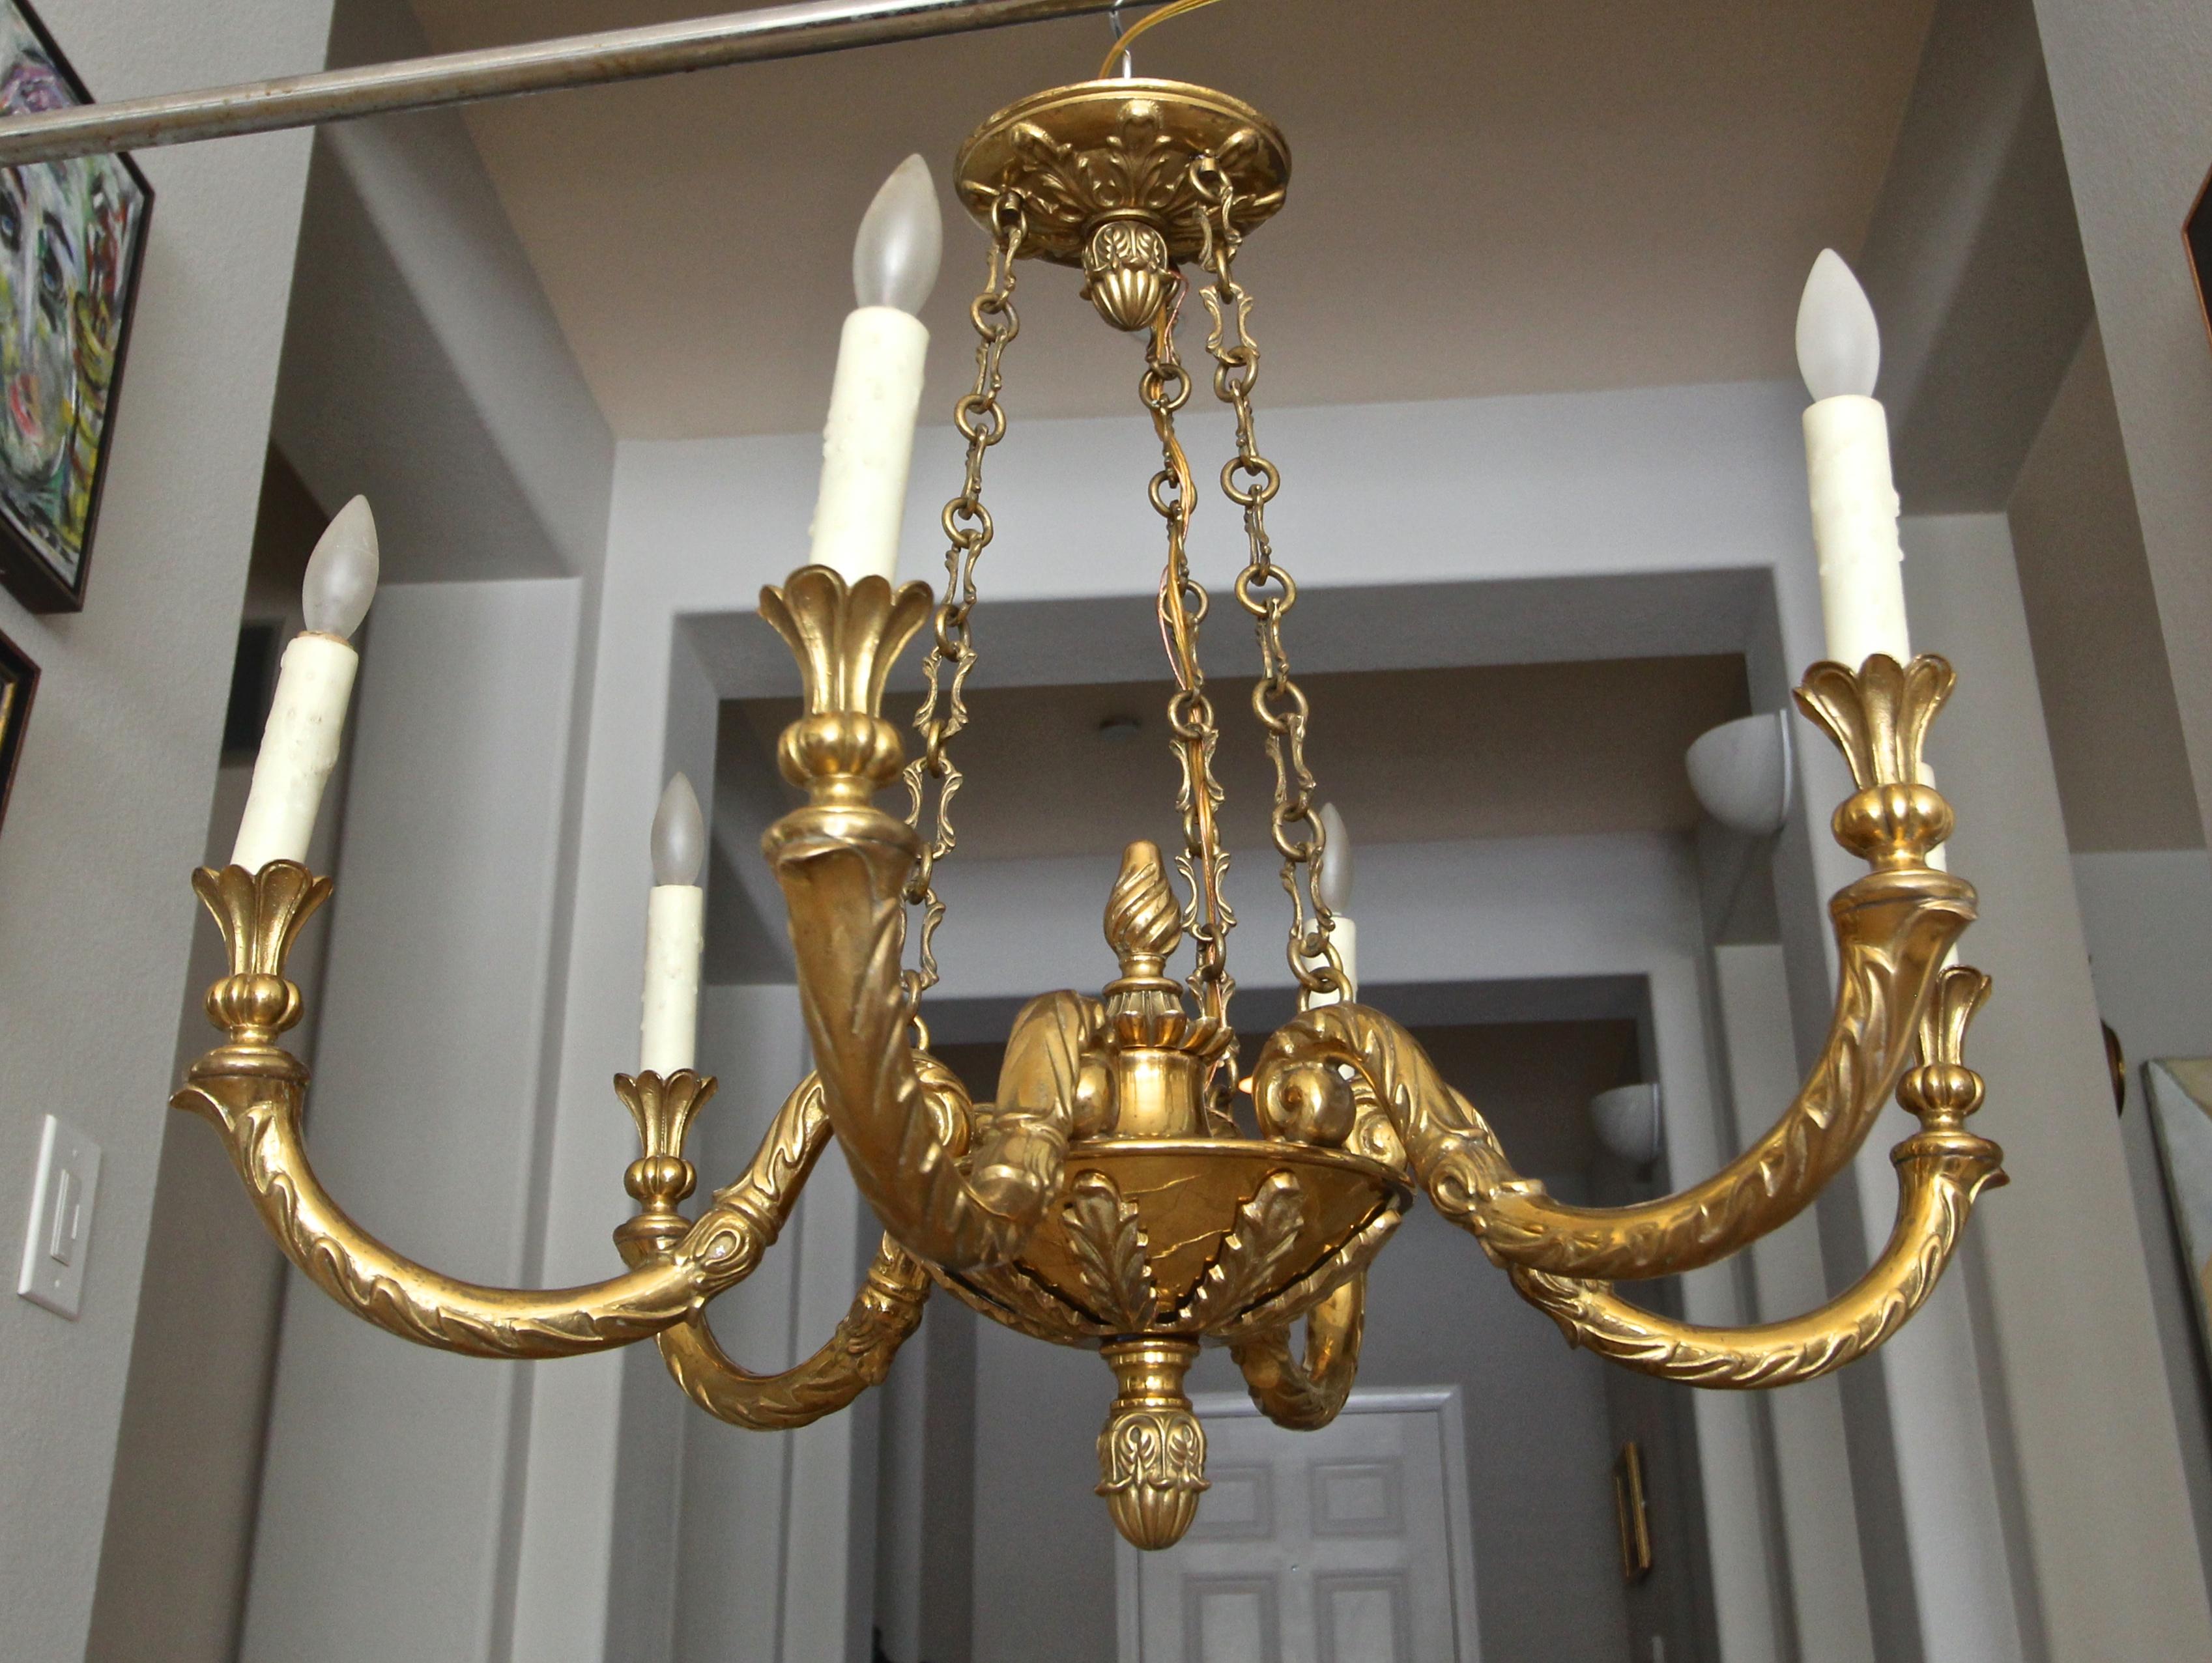 Impressive Italian solid bronze or brass six-arm/light chandelier. Well constructed with fine detailing throughout. Uses 6 candelabra base bulbs.